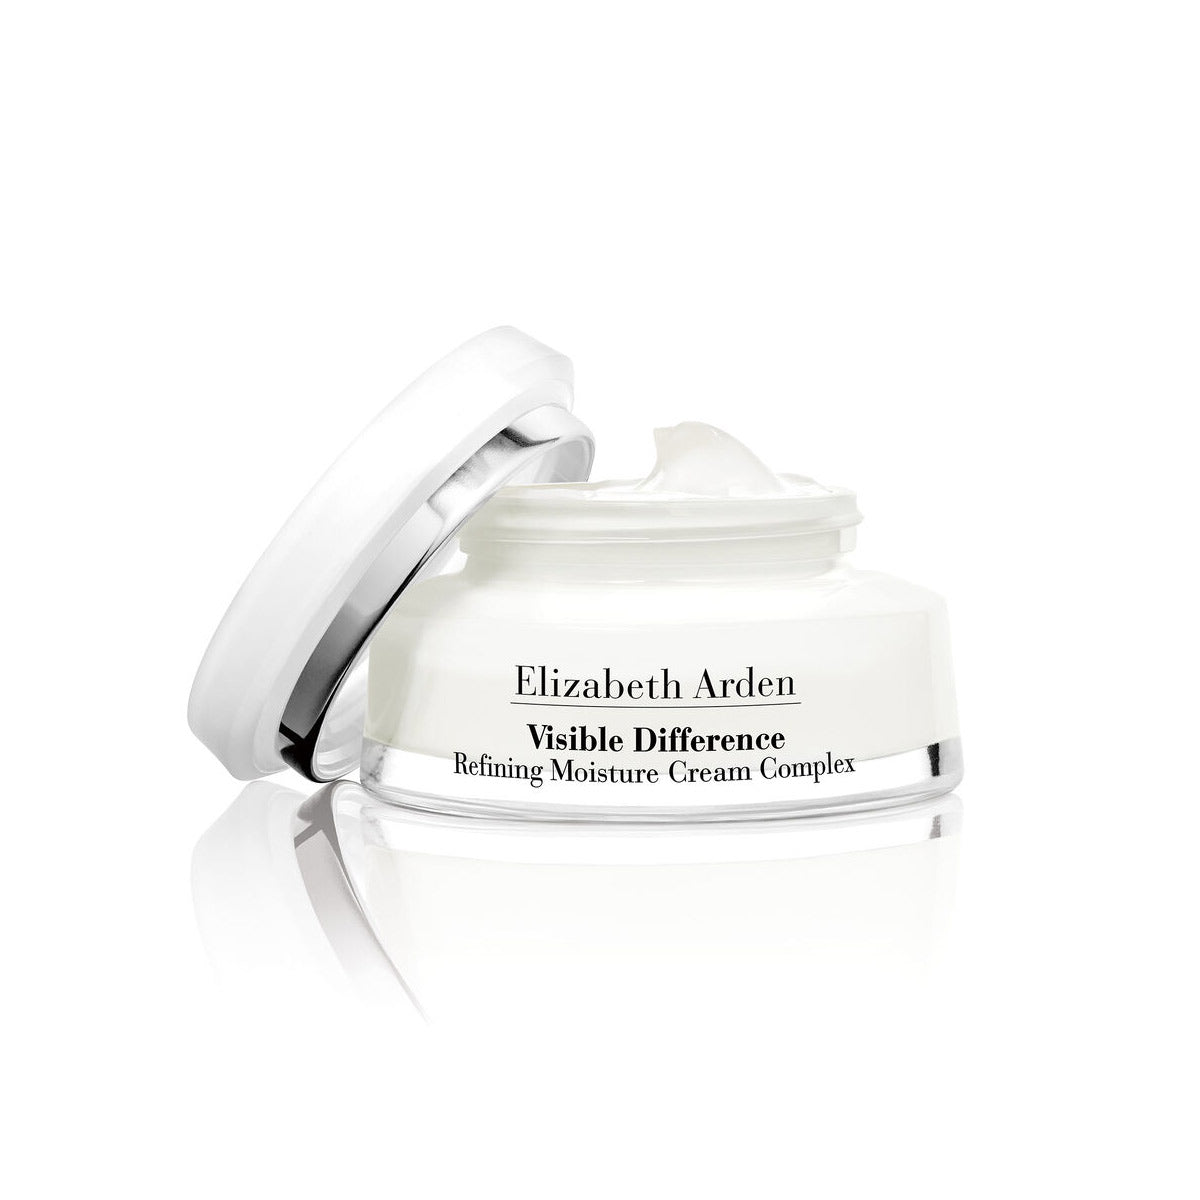 Visible Difference Refining Moisture Cream Complex 75ml